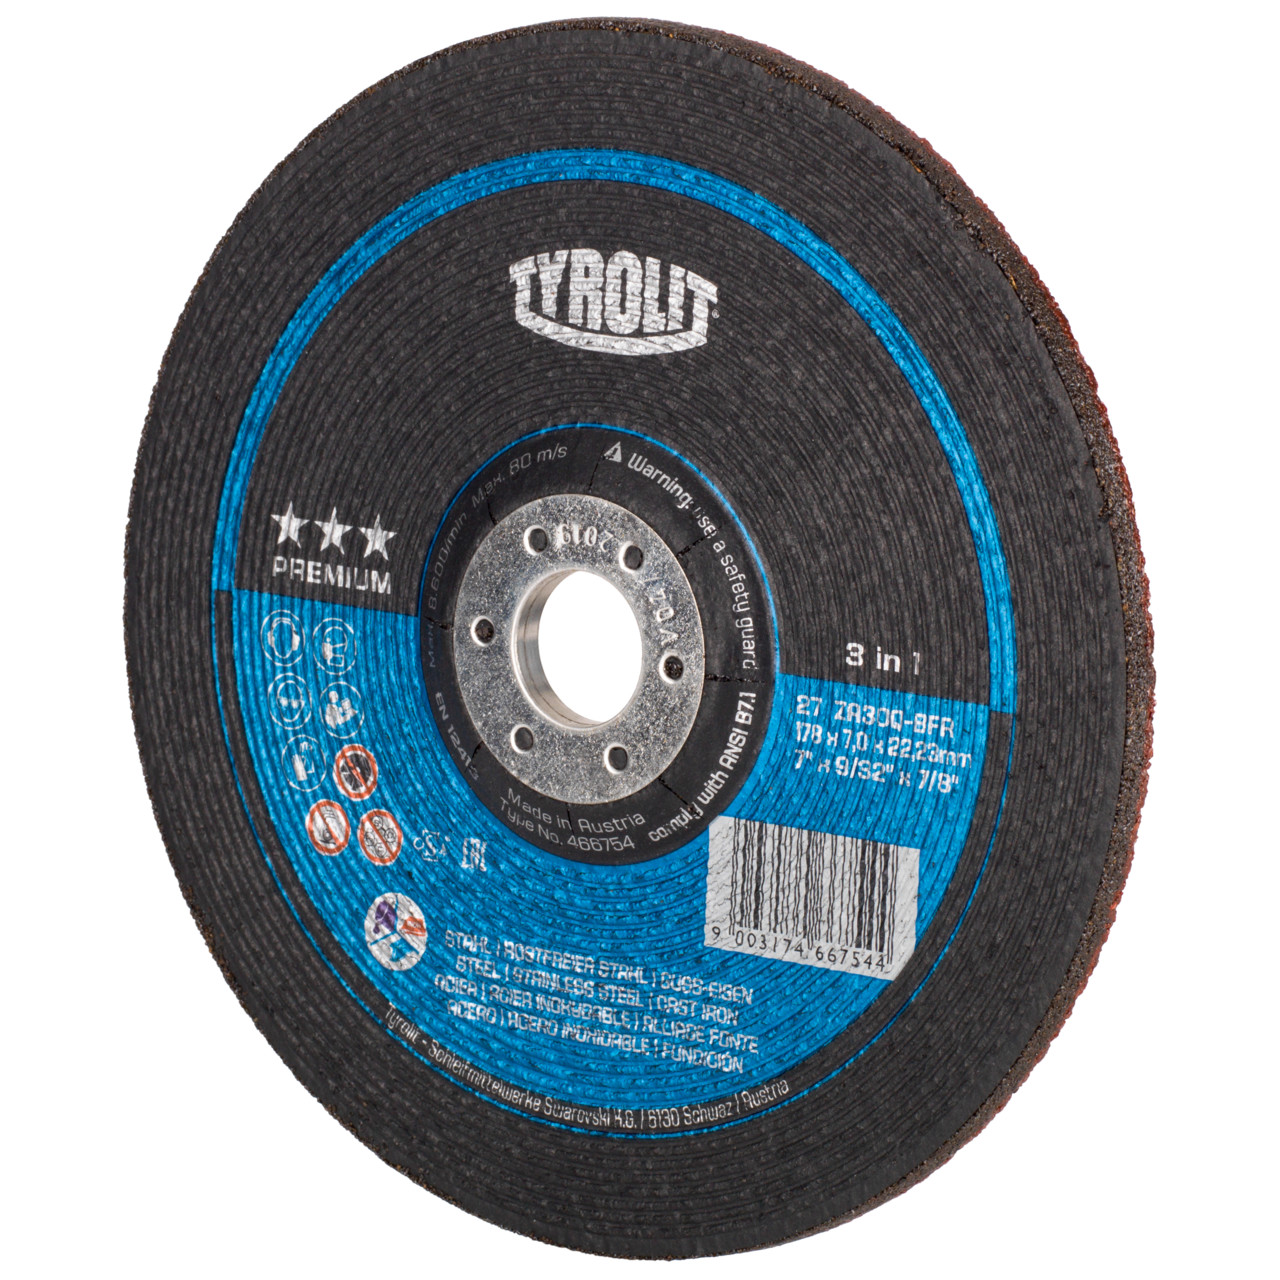 TYROLIT grinding wheel DxUxH 125x7x22.23 3in1 for steel and stainless steel and cast iron, shape: 27 - offset version, Art. 466749